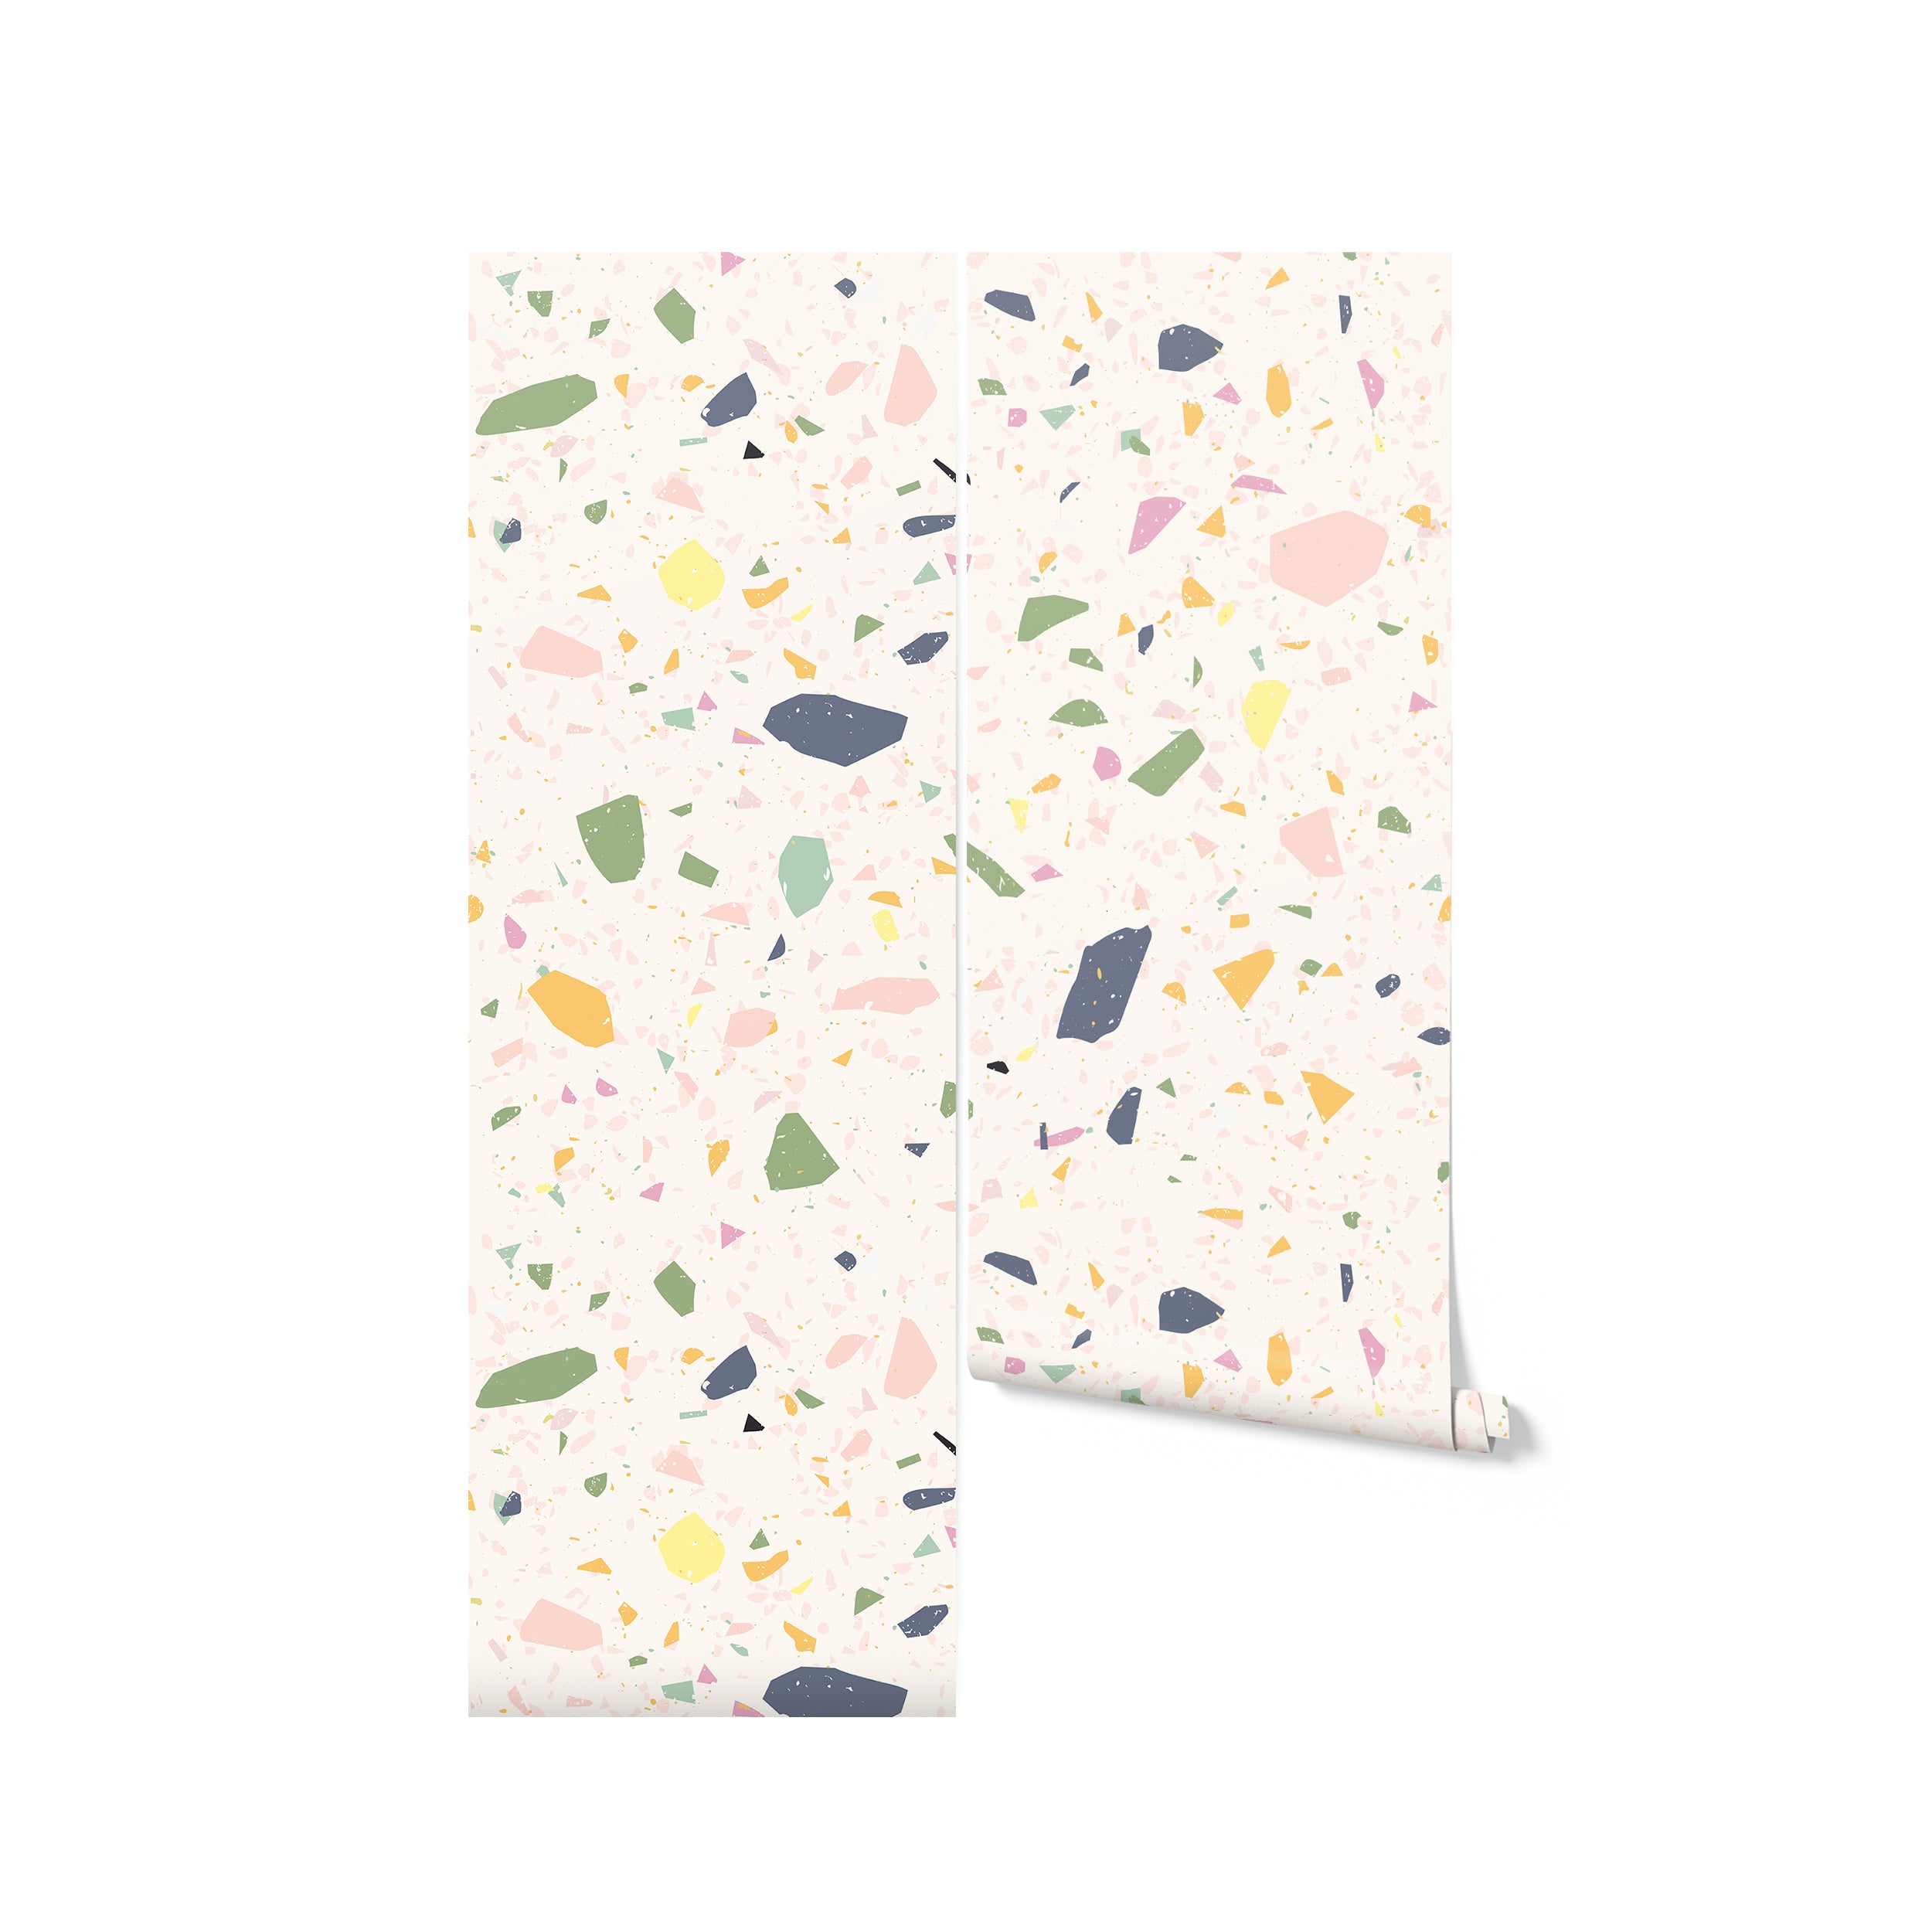 A wallpaper sample depicting a terrazzo pattern with pastel-colored chunks on a pale cream background, shown as a rolled product. The design is child-friendly with a soft and sweet color palette, reminiscent of cotton candy, and is suitable for adding a playful yet modern touch to a room.